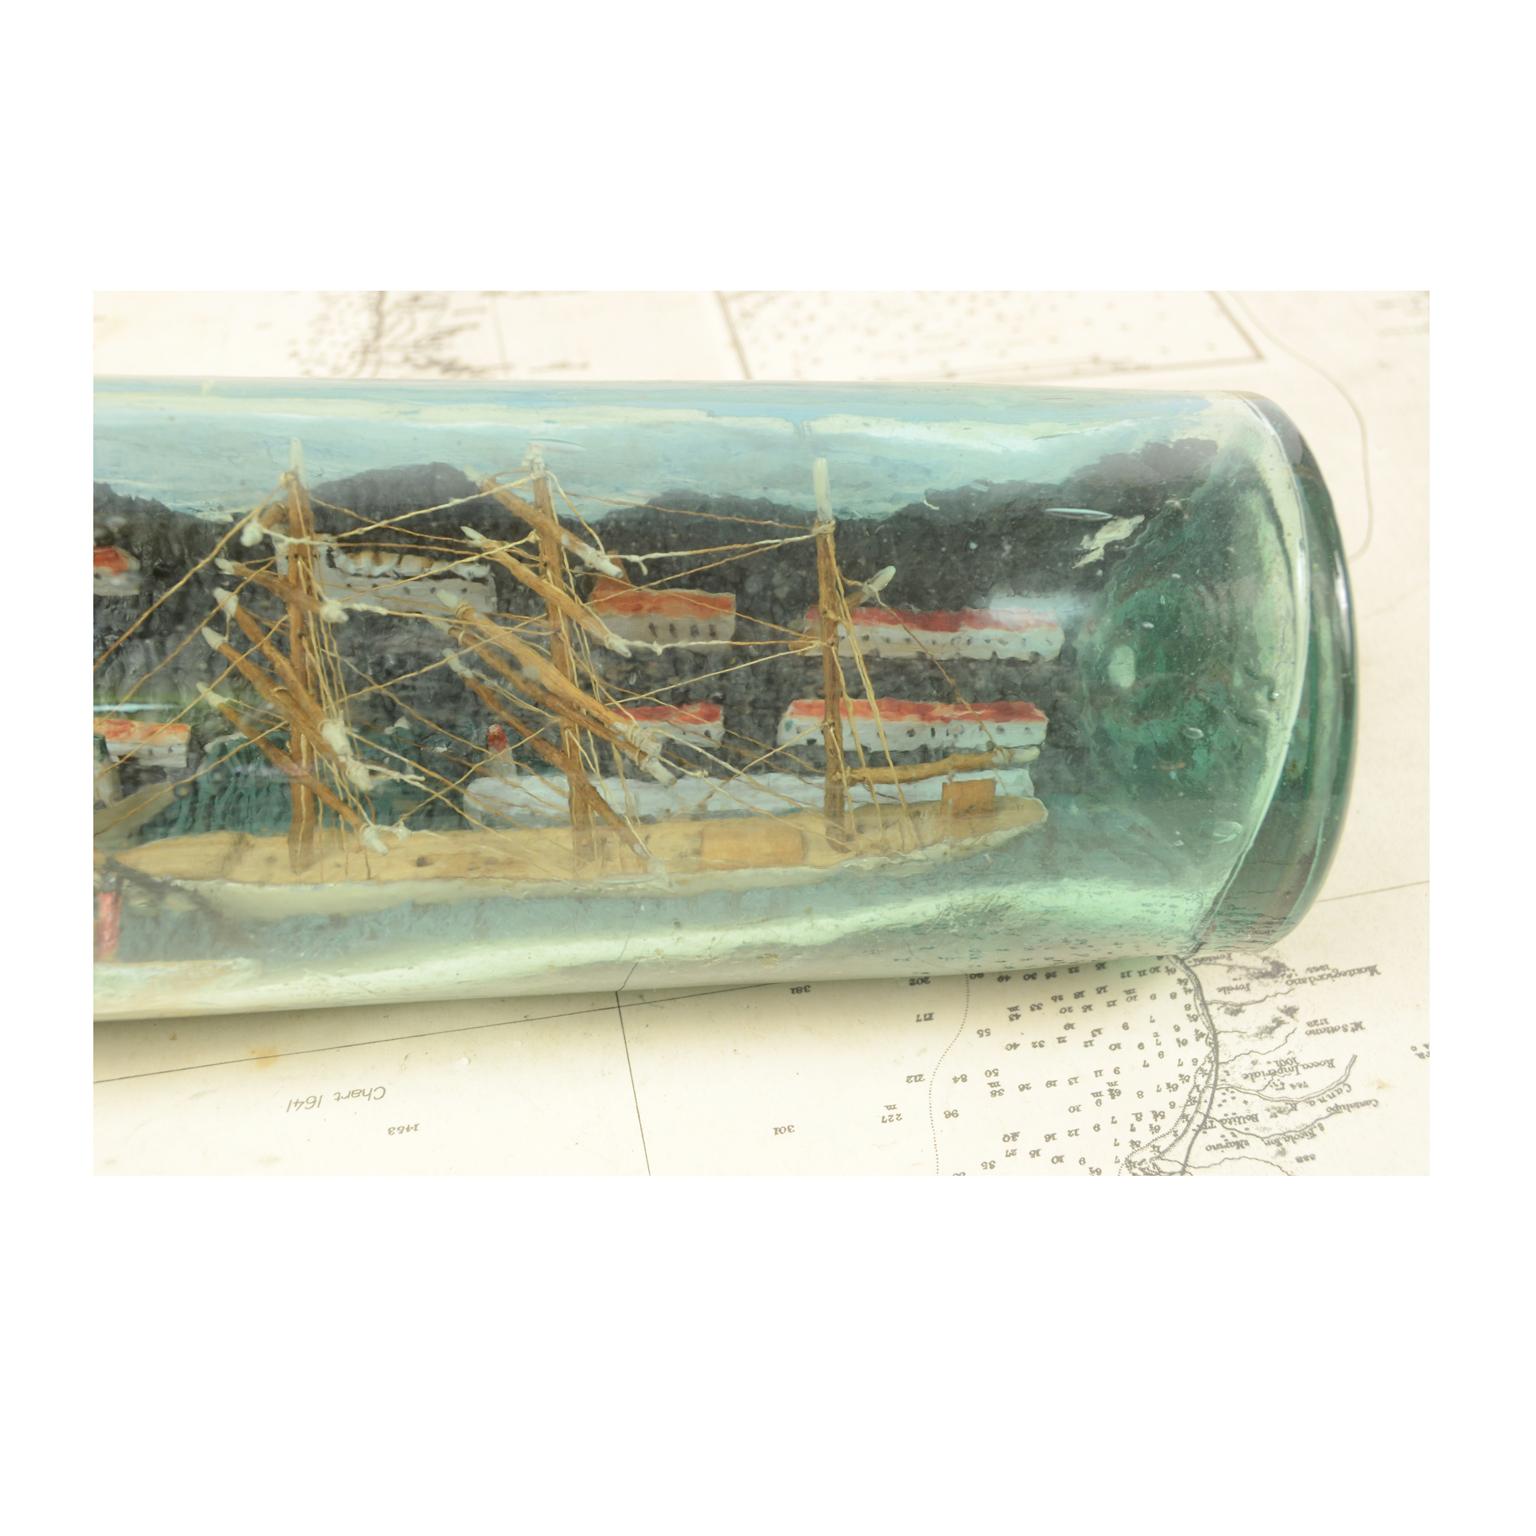 Early 20th Century Diorama in a Bottle, Depicting a 3-Masted Ship, 1920s